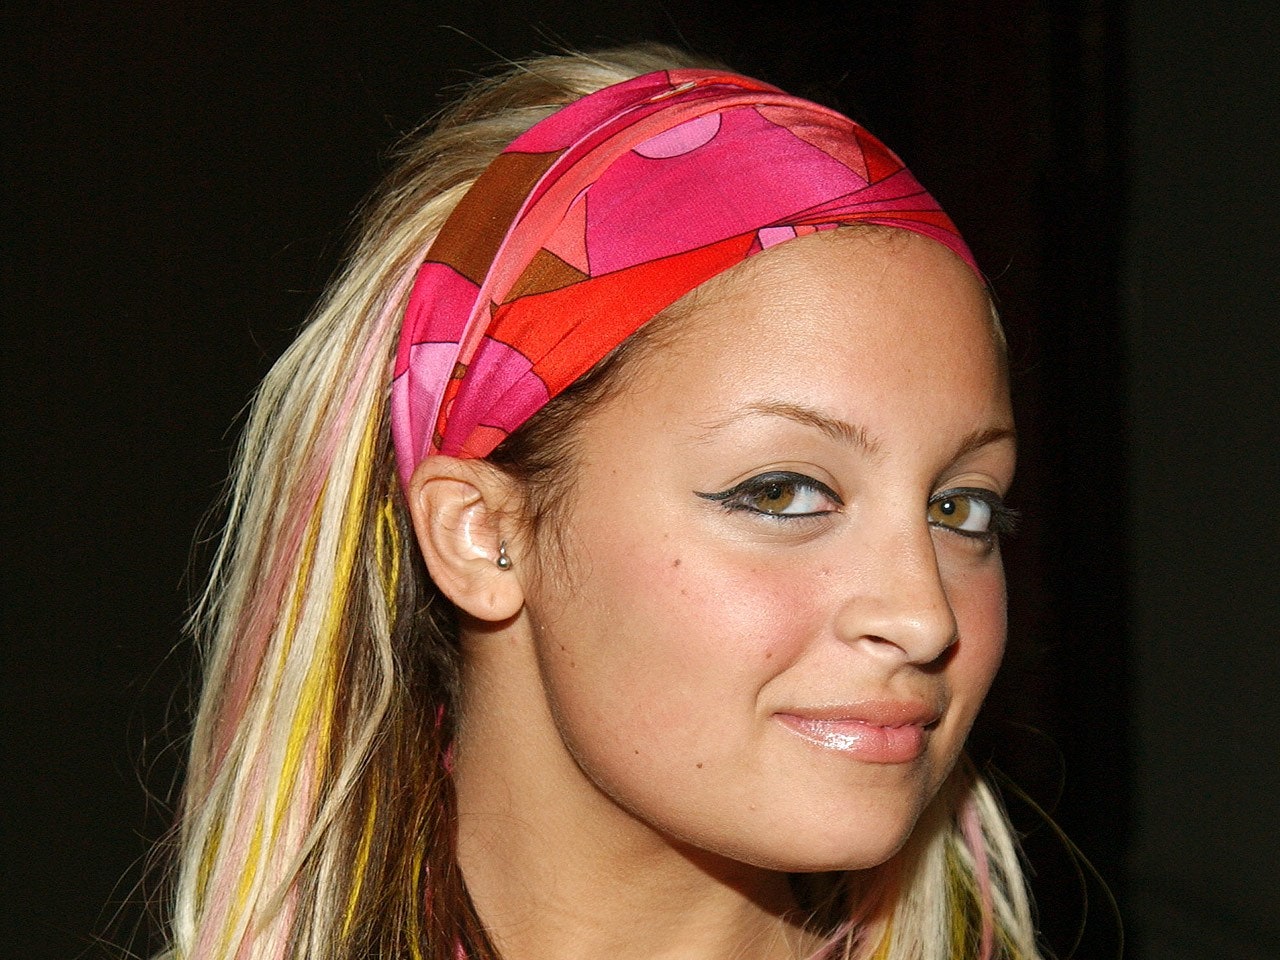 Nicole Richie Plastic Surgery: Before and After Her Boob Job